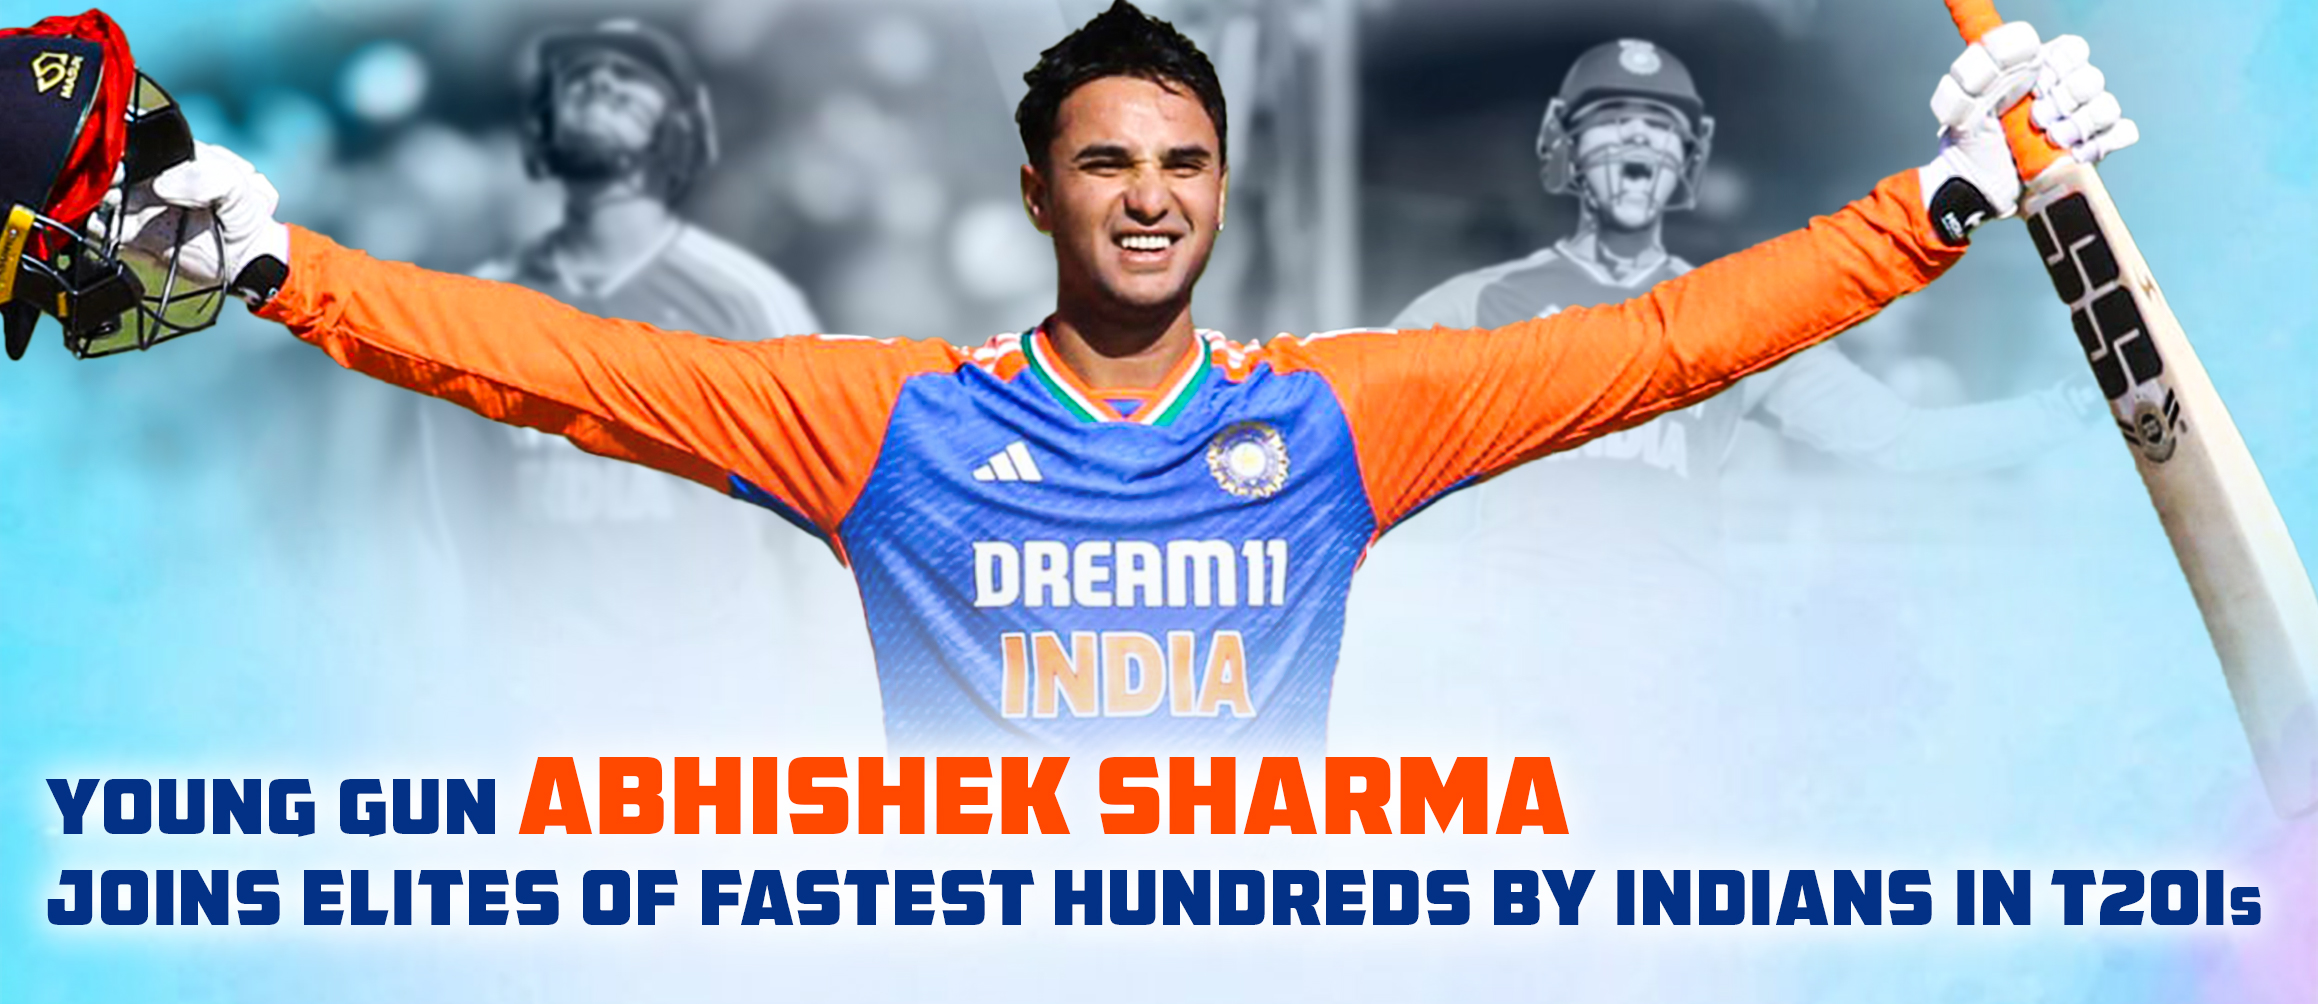 Young Gun Abhishek Sharma Joins Elites of Fastest Hundreds by Indians in T20Is